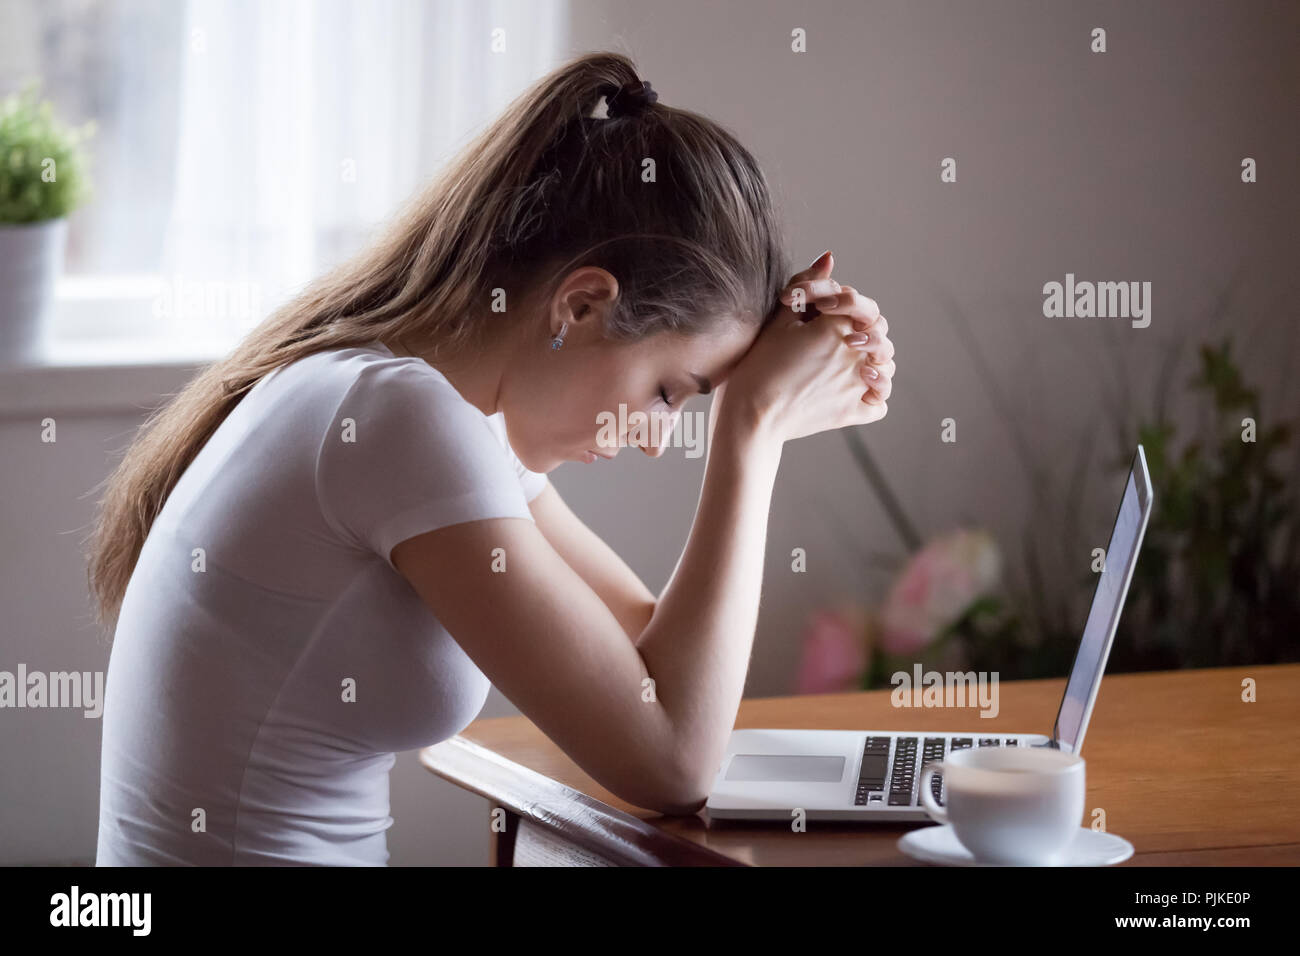 Upset young woman feel down receiving negative message Stock Photo